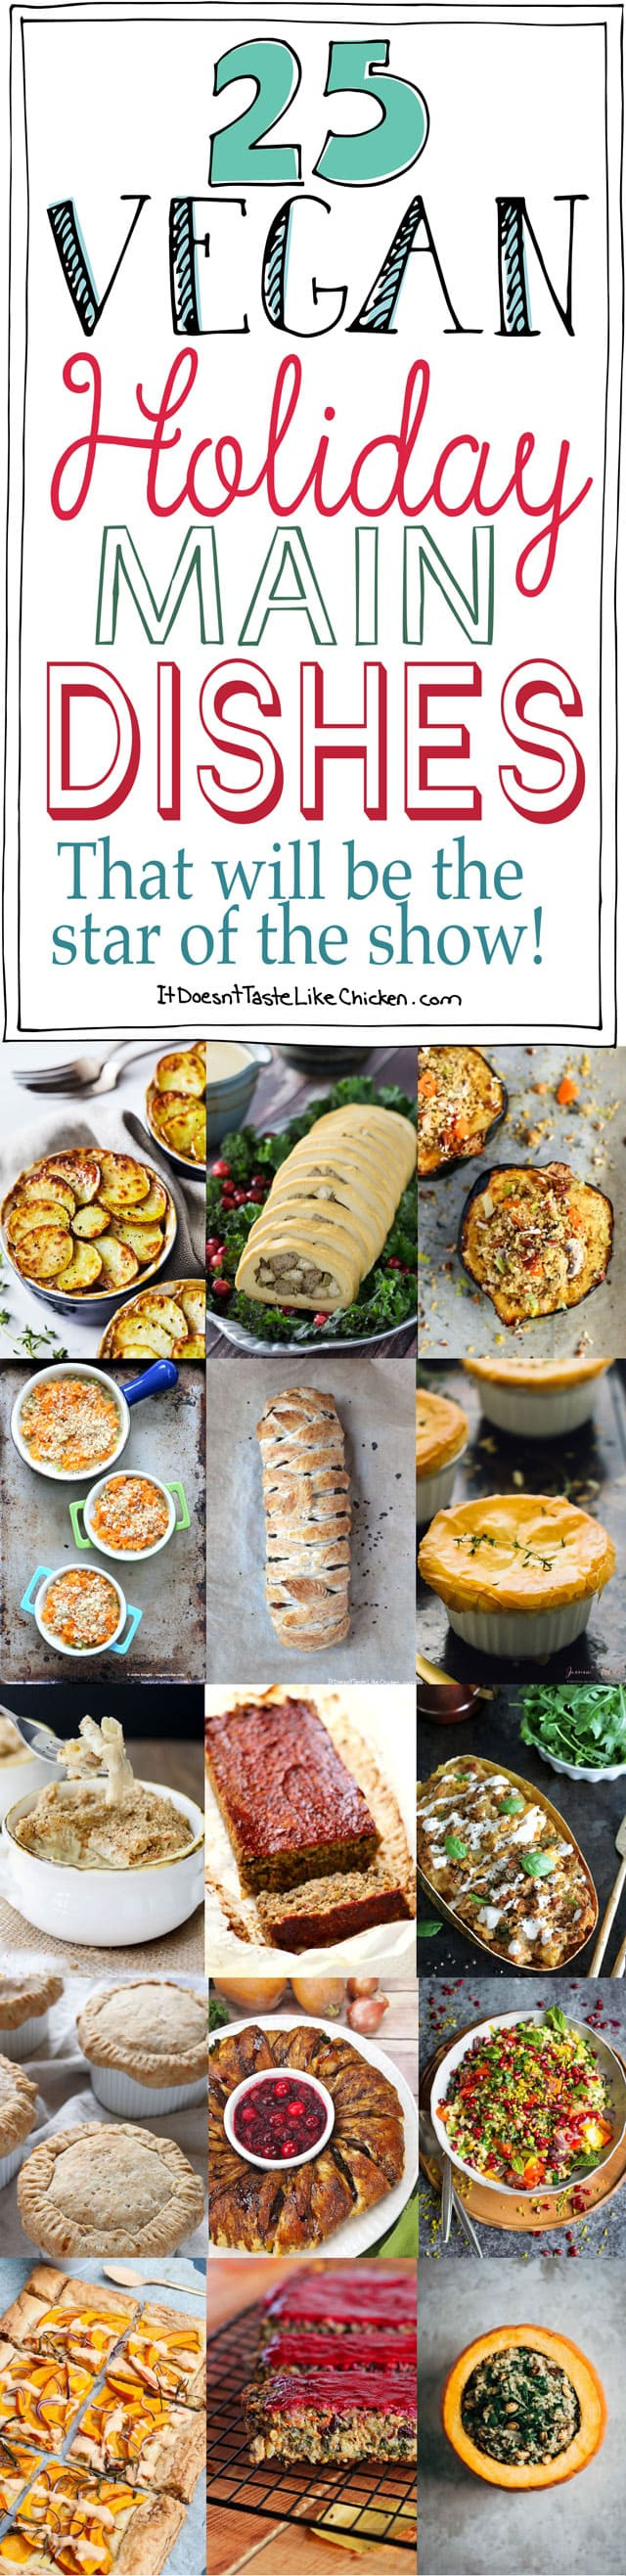 Vegan Main Dishes For Thanksgiving
 25 Vegan Holiday Main Dishes That Will Be The Star of the